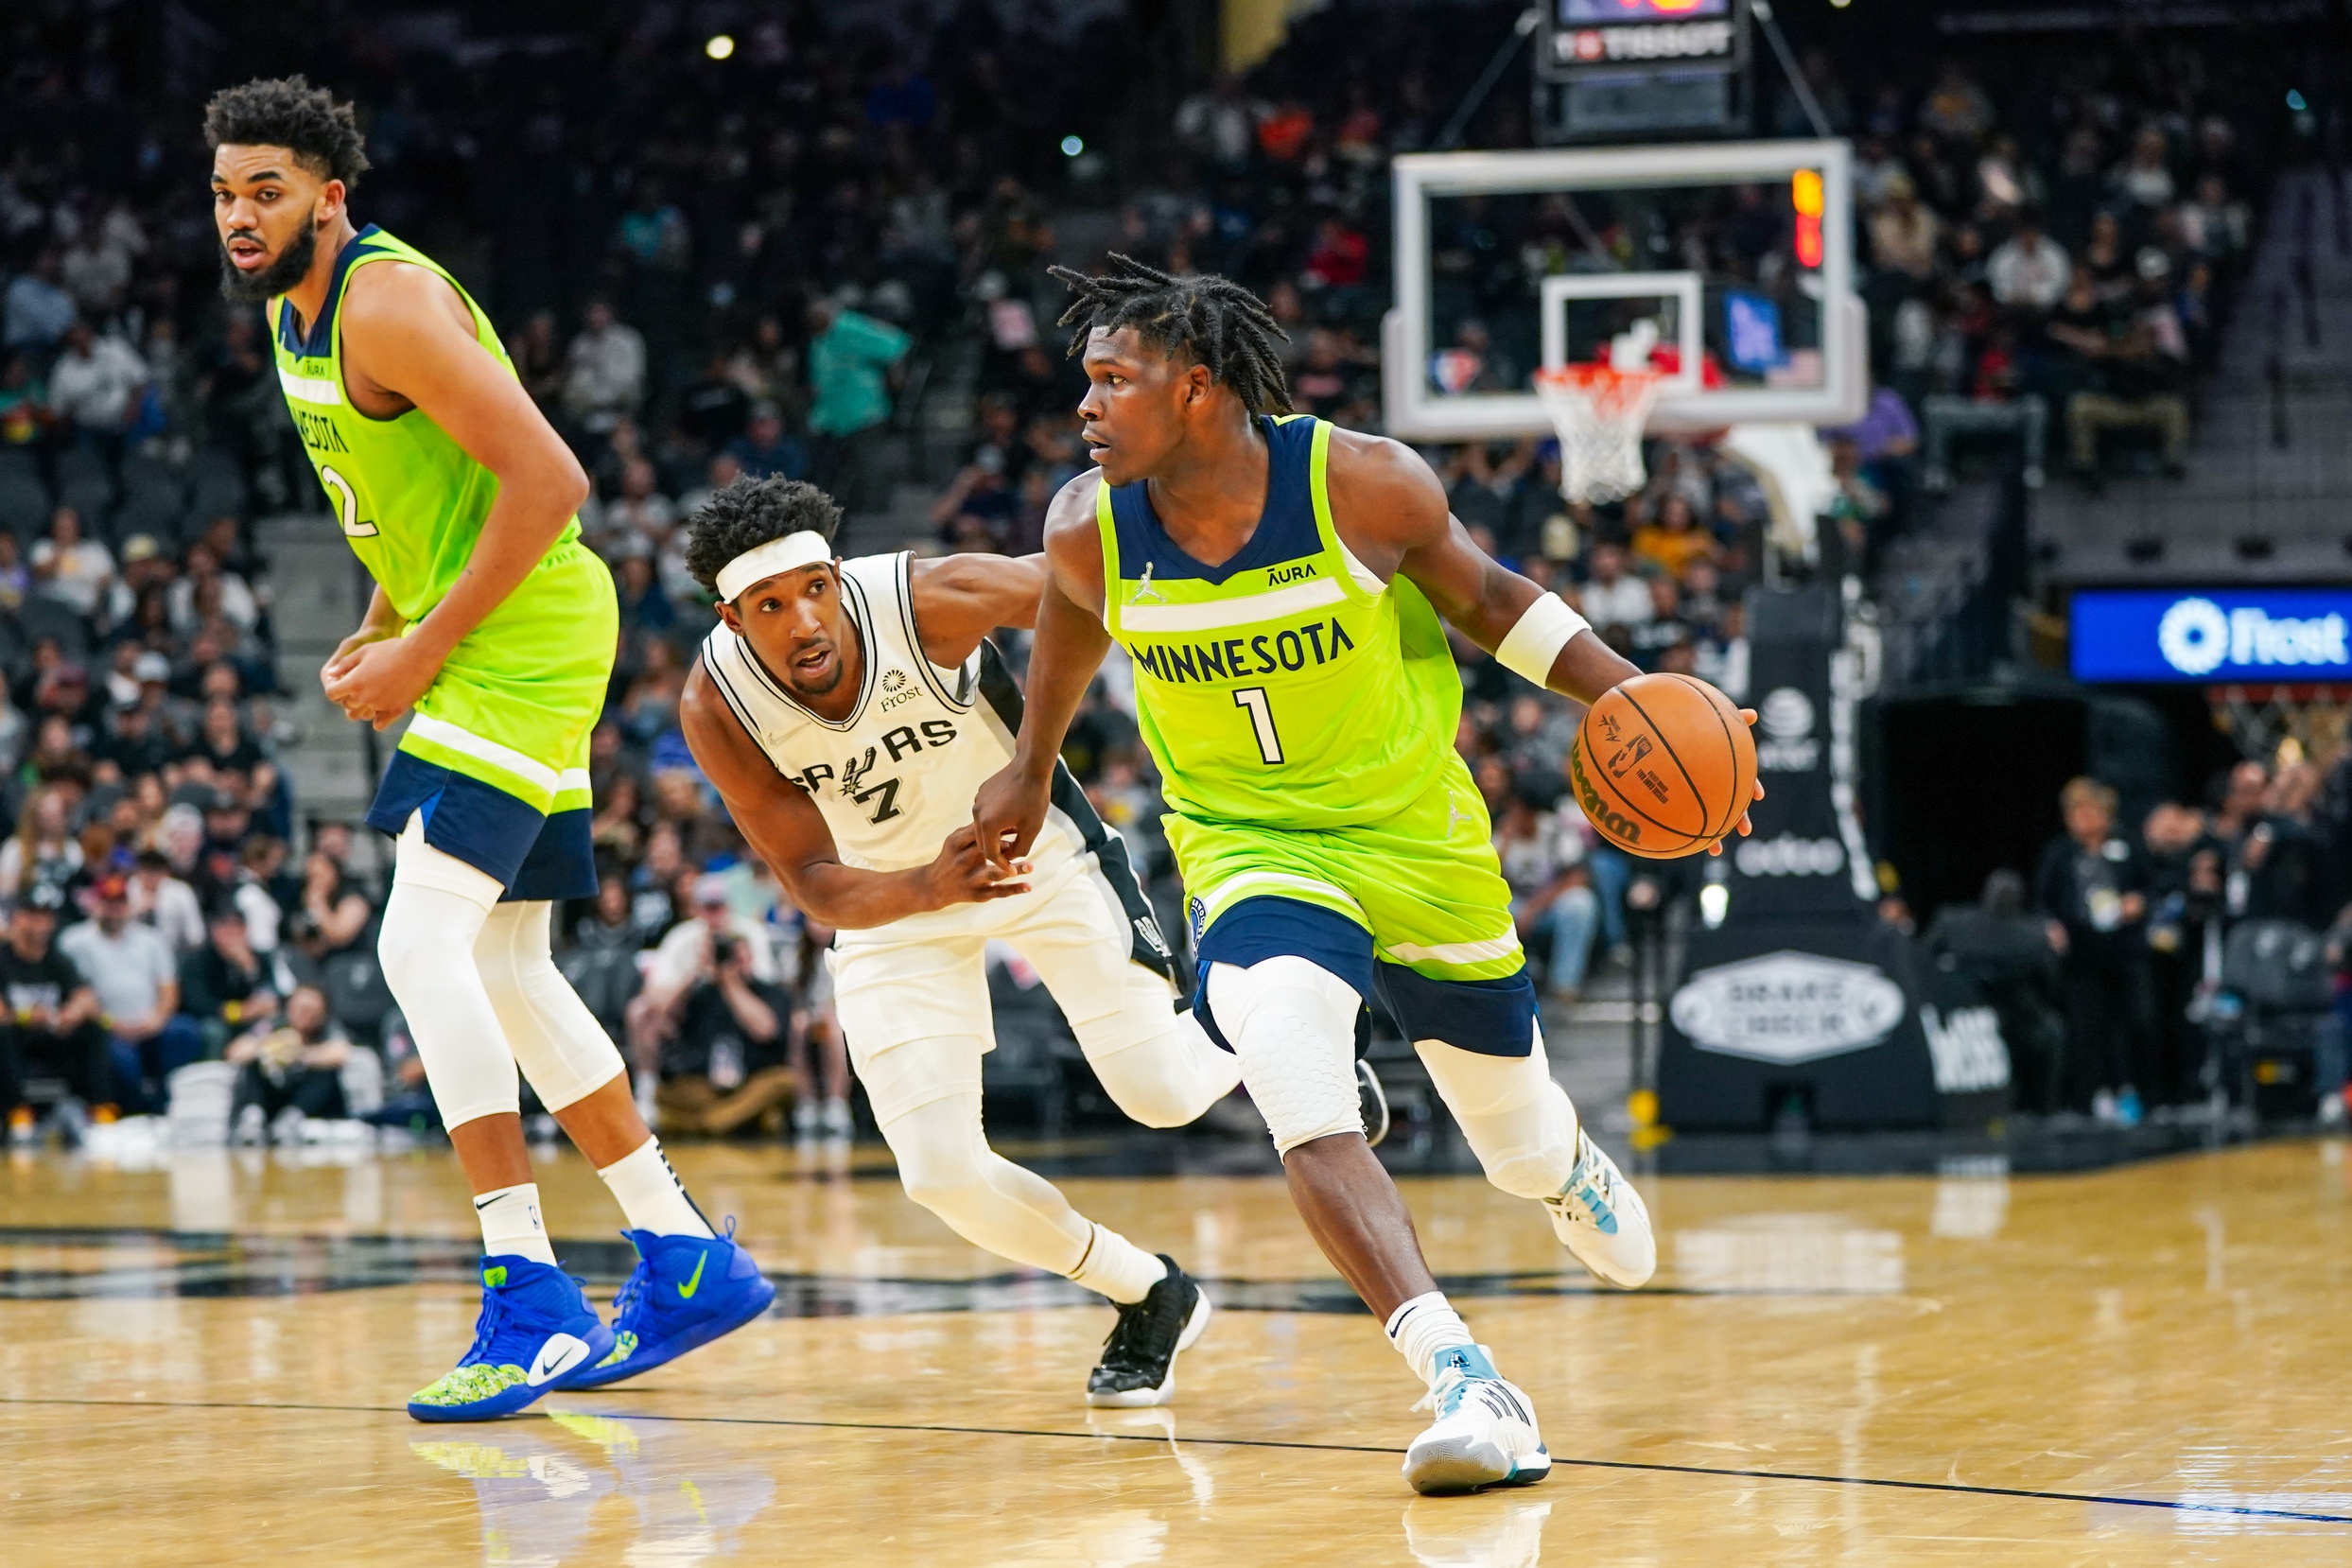 Spurs vs. Timberwolves Preview How to Watch, Lineups, Injury News